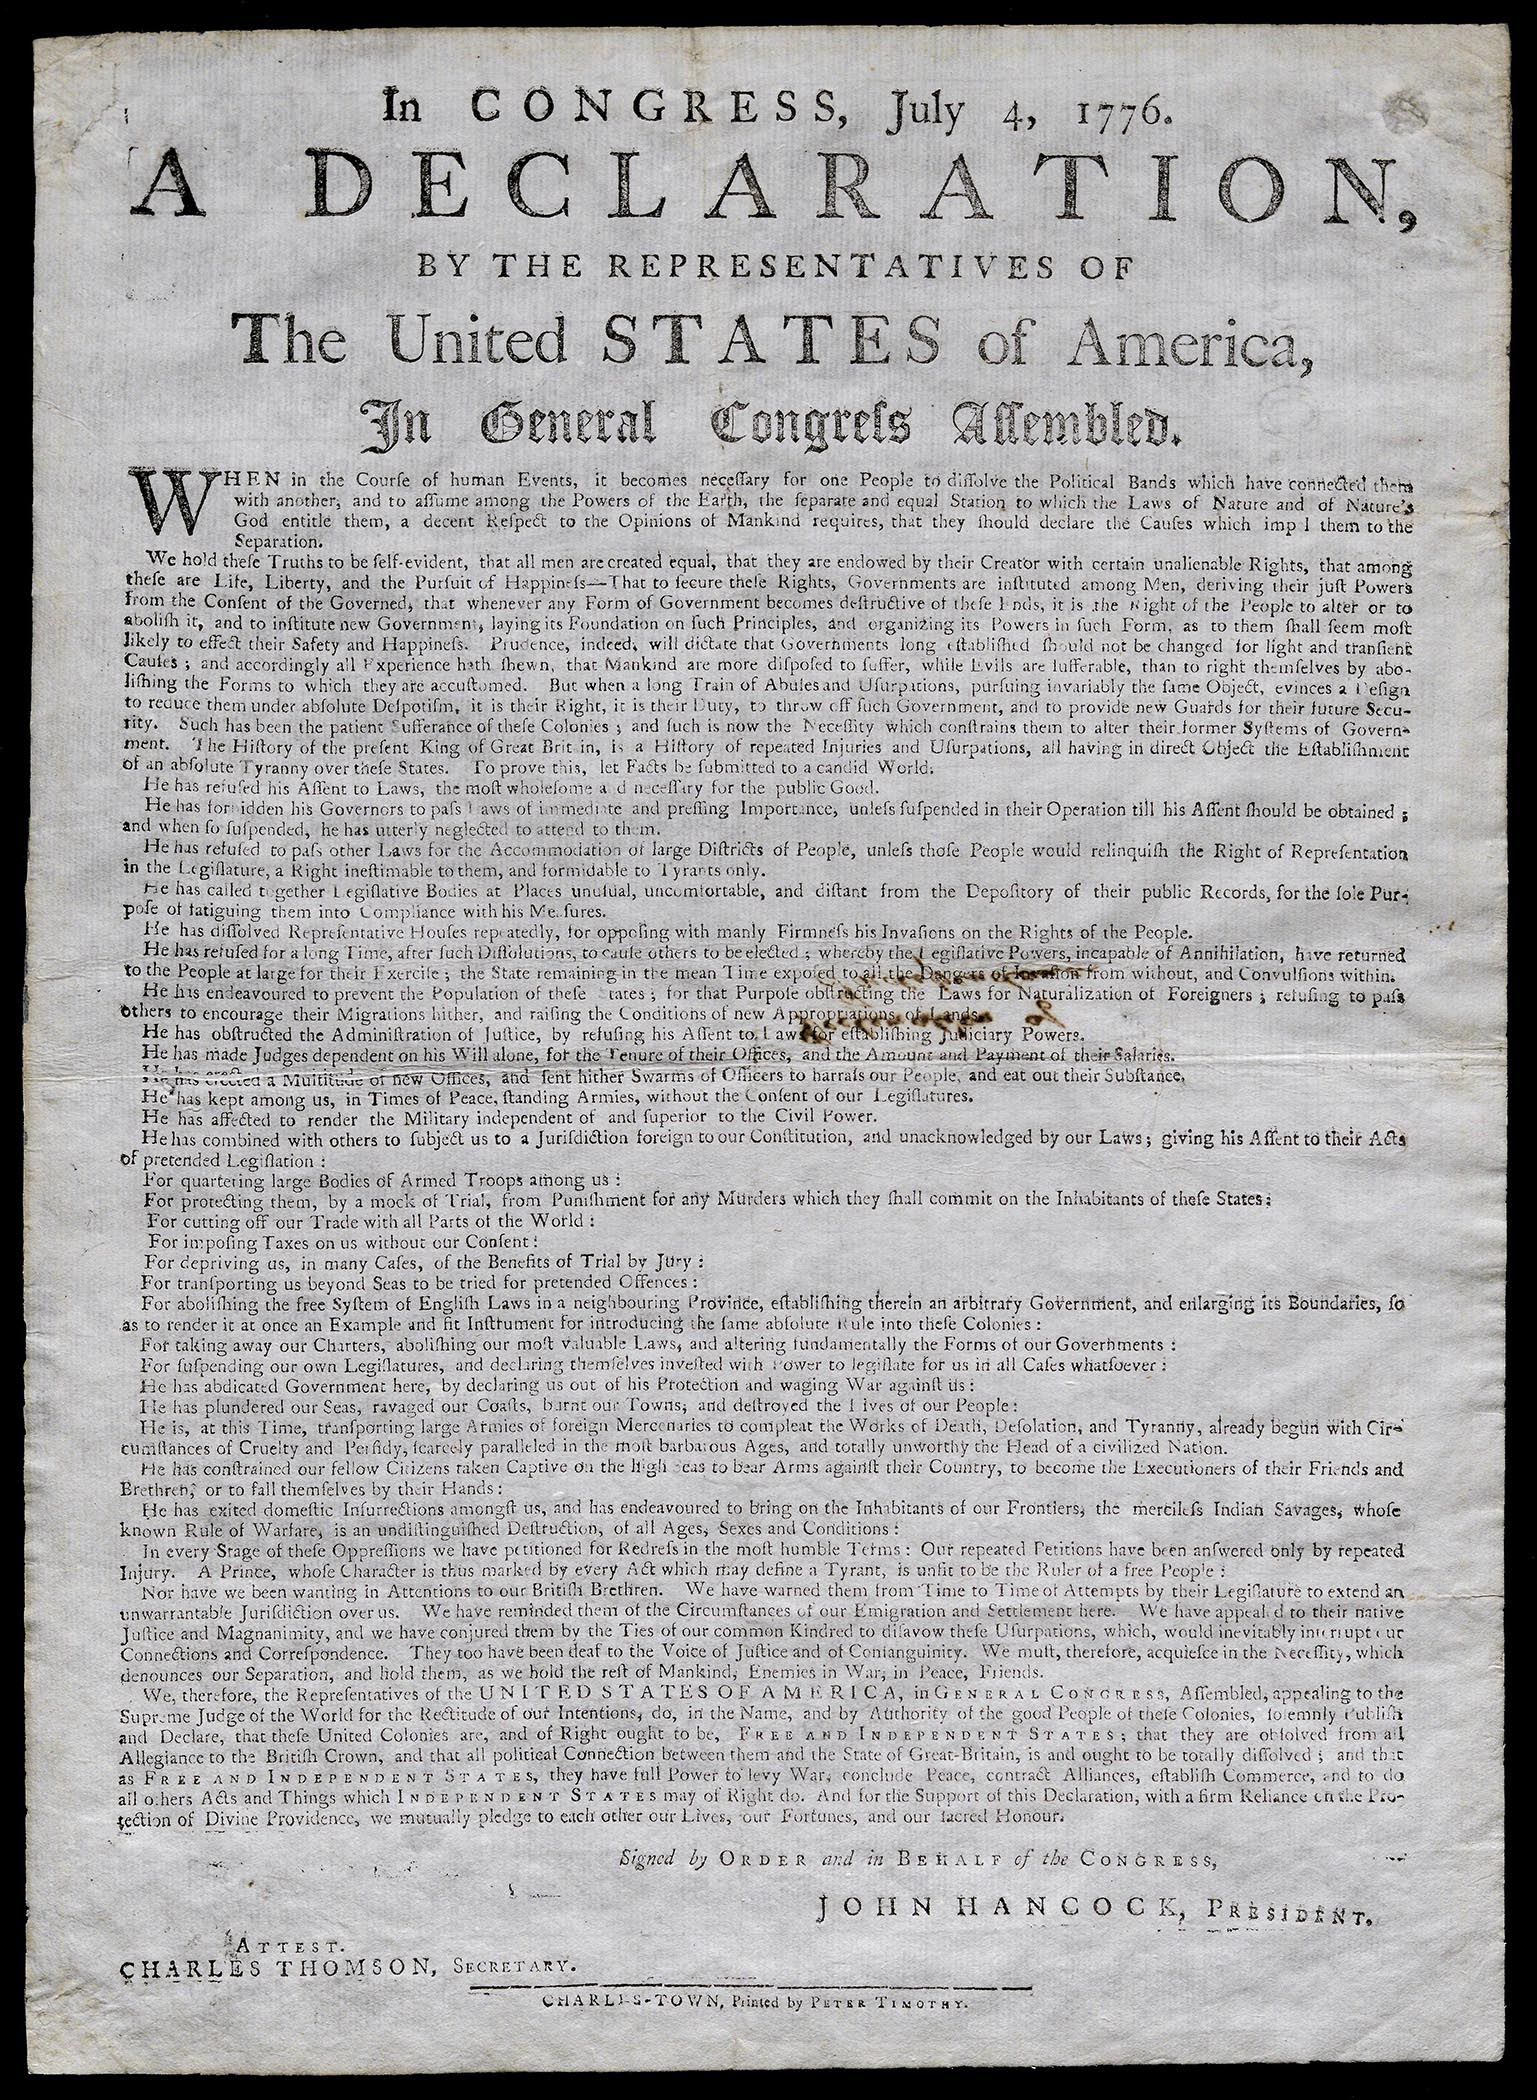 Declaration of Independence, printed by Peter Timothy, Charleston, South Carolina, August 2, 1776. (The Gilder Lehrman Institute, GLC00959)